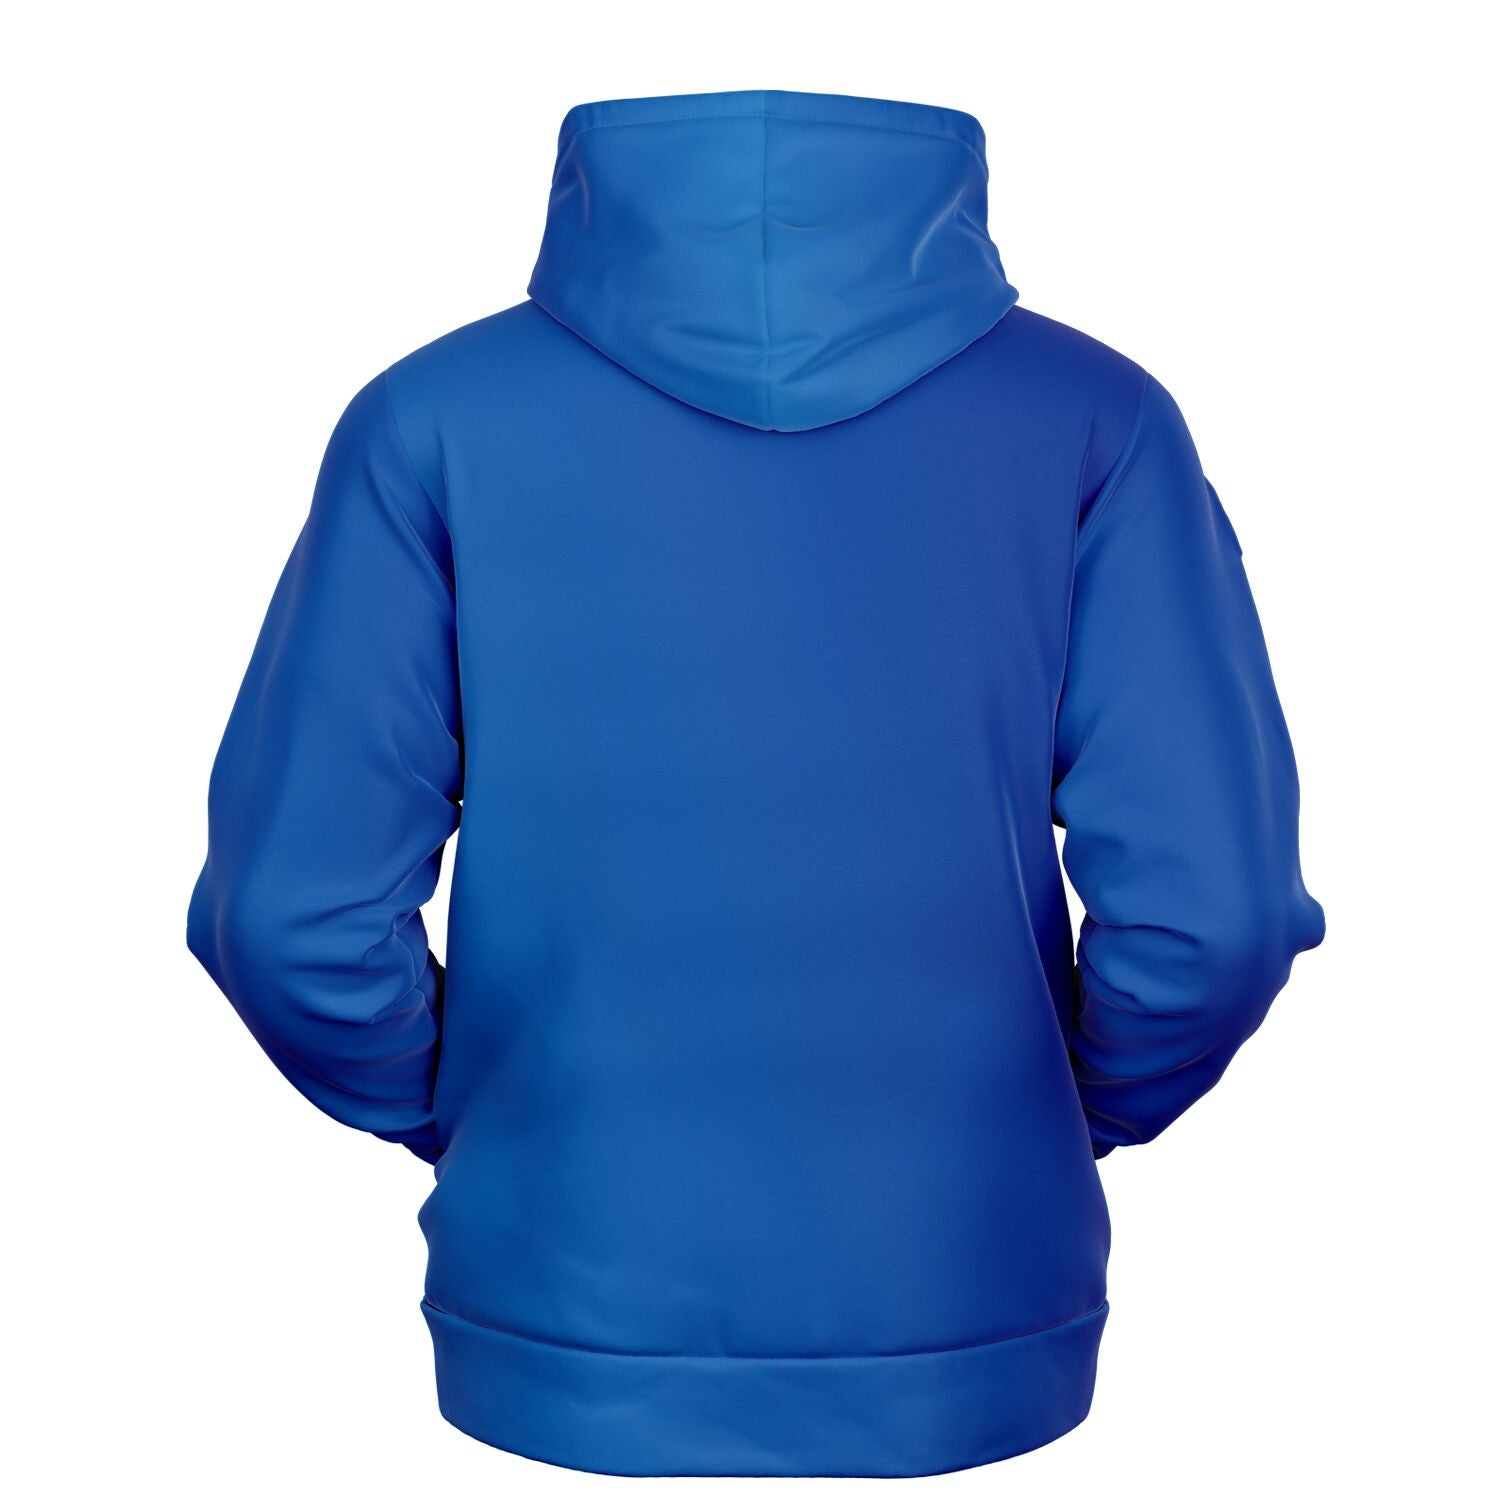 Dilly Dilly Hoodie